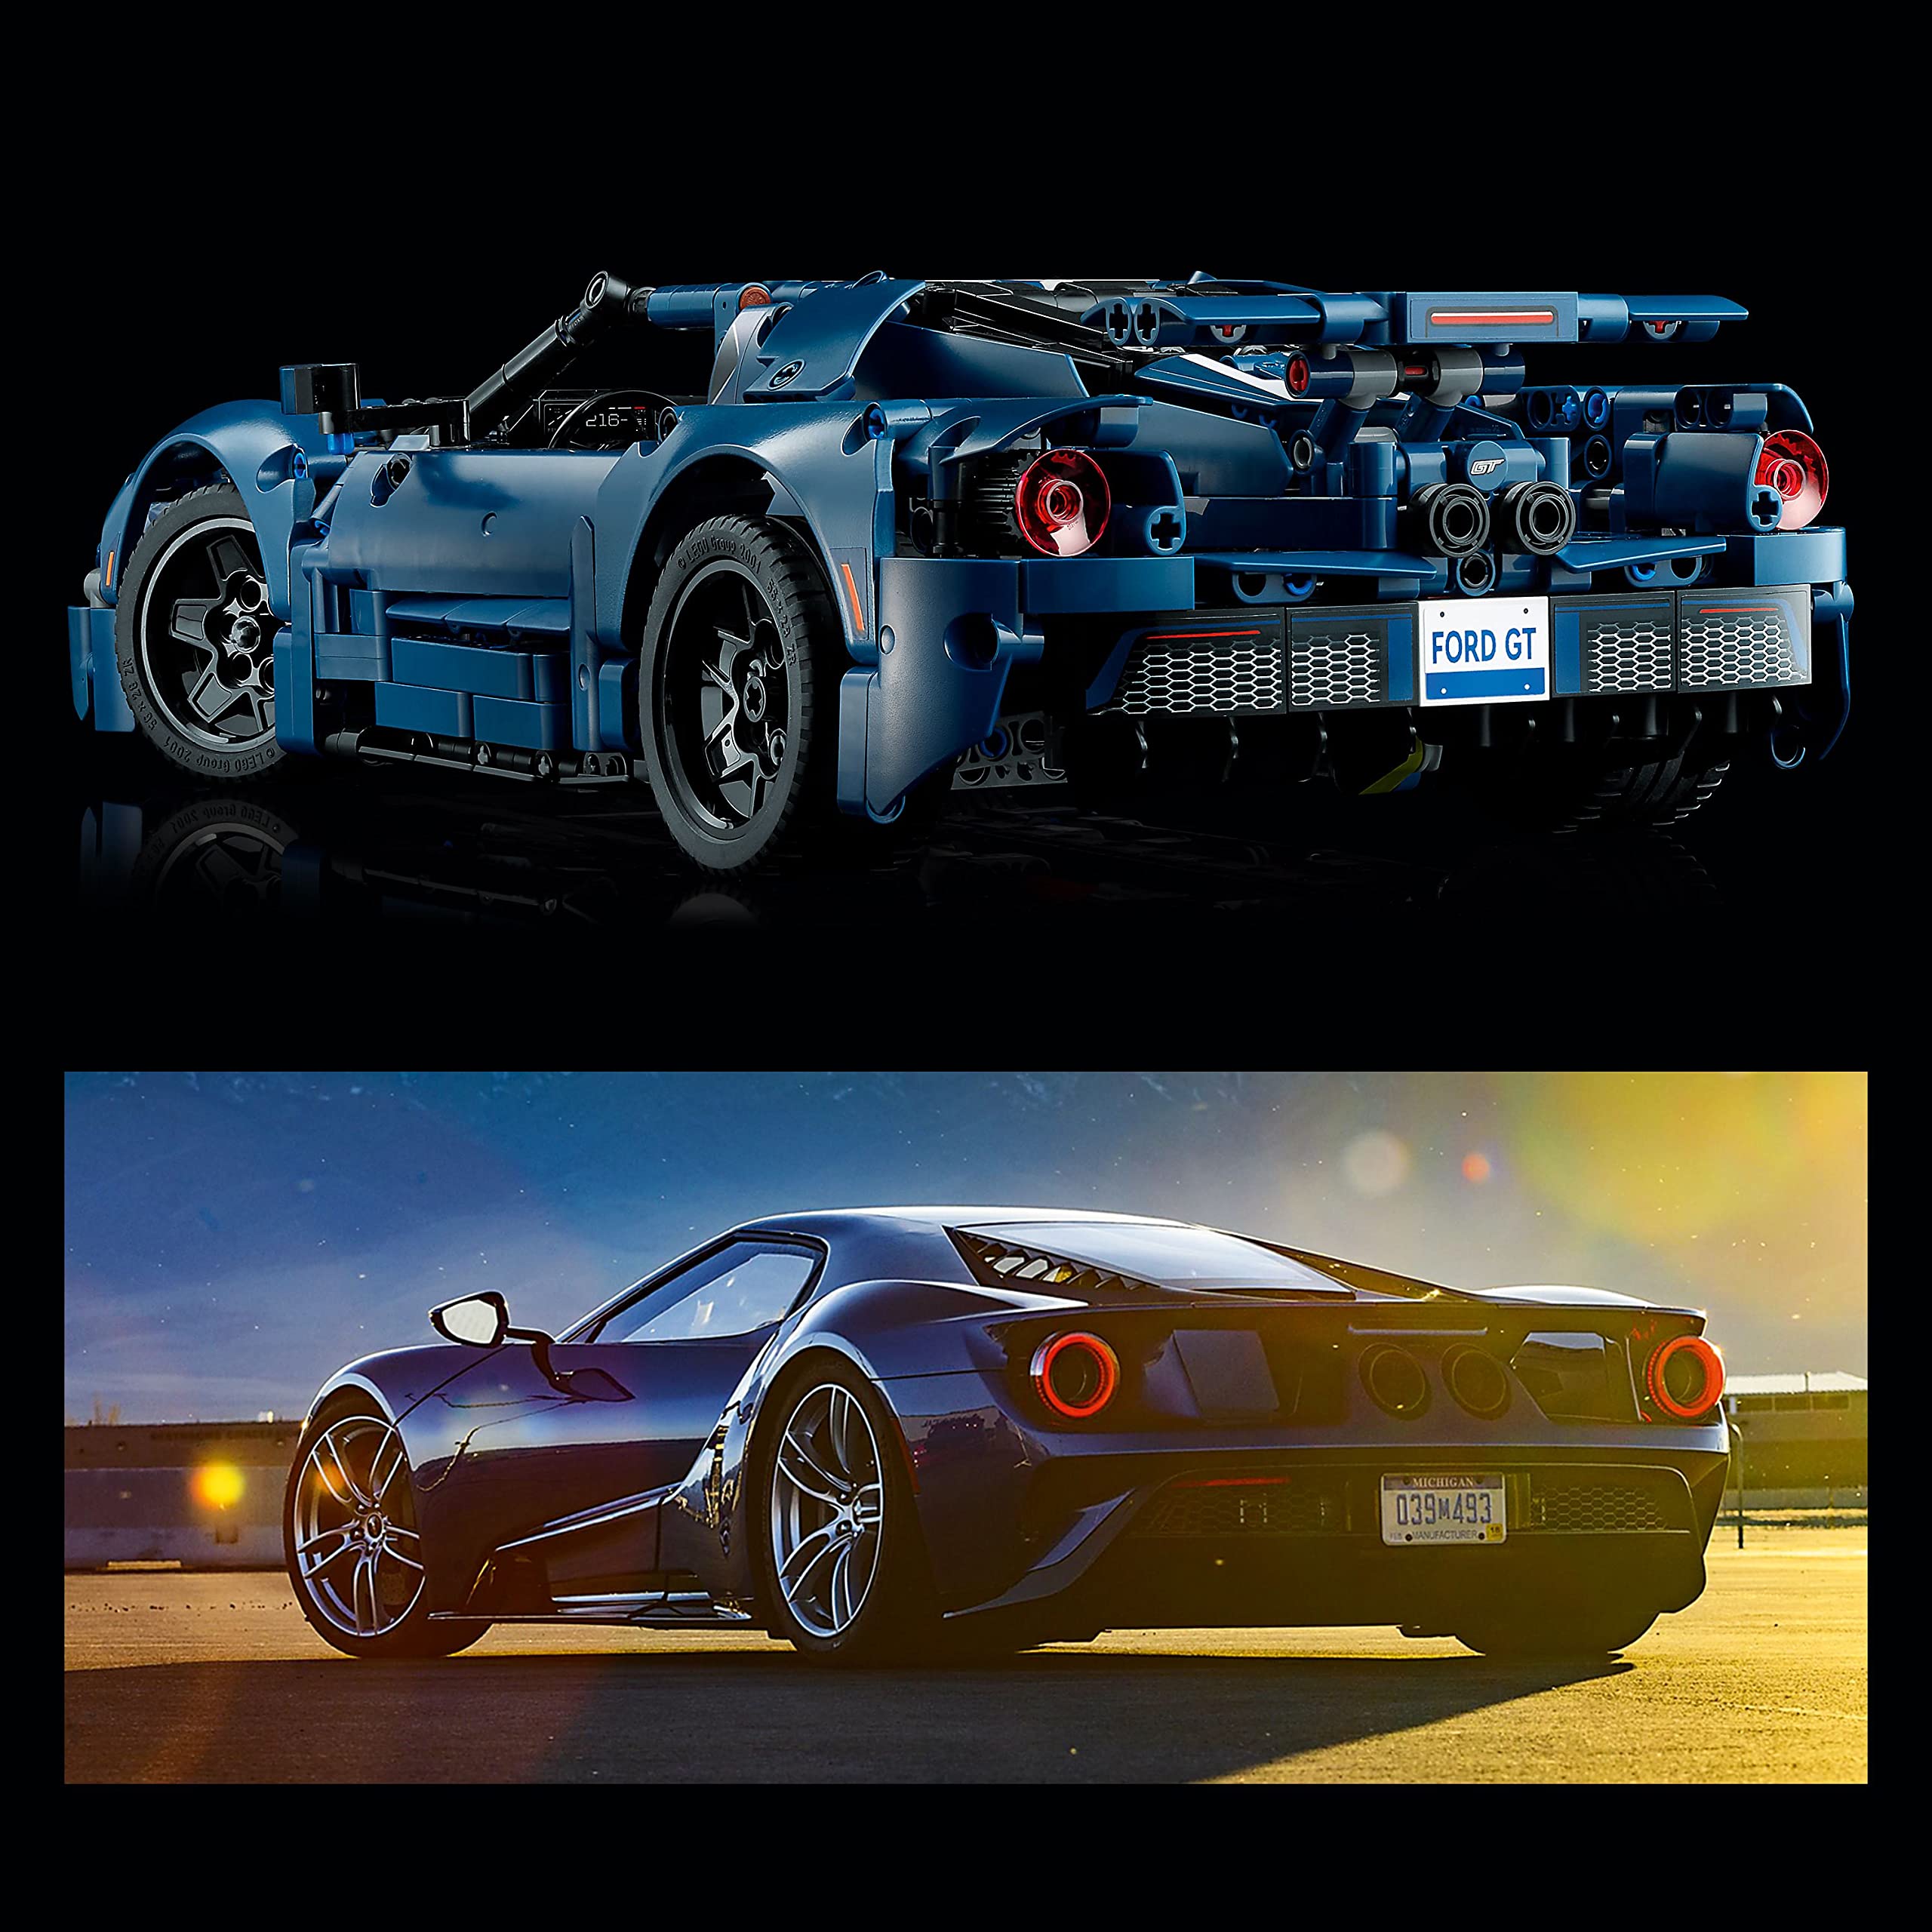 LEGO Technic 2022 Ford GT 42154 Car Model Kit for Adults to Build, 1:12 Scale Supercar with Authentic Features, Collectible Set, Idea That Fuels Creativity and Imagination